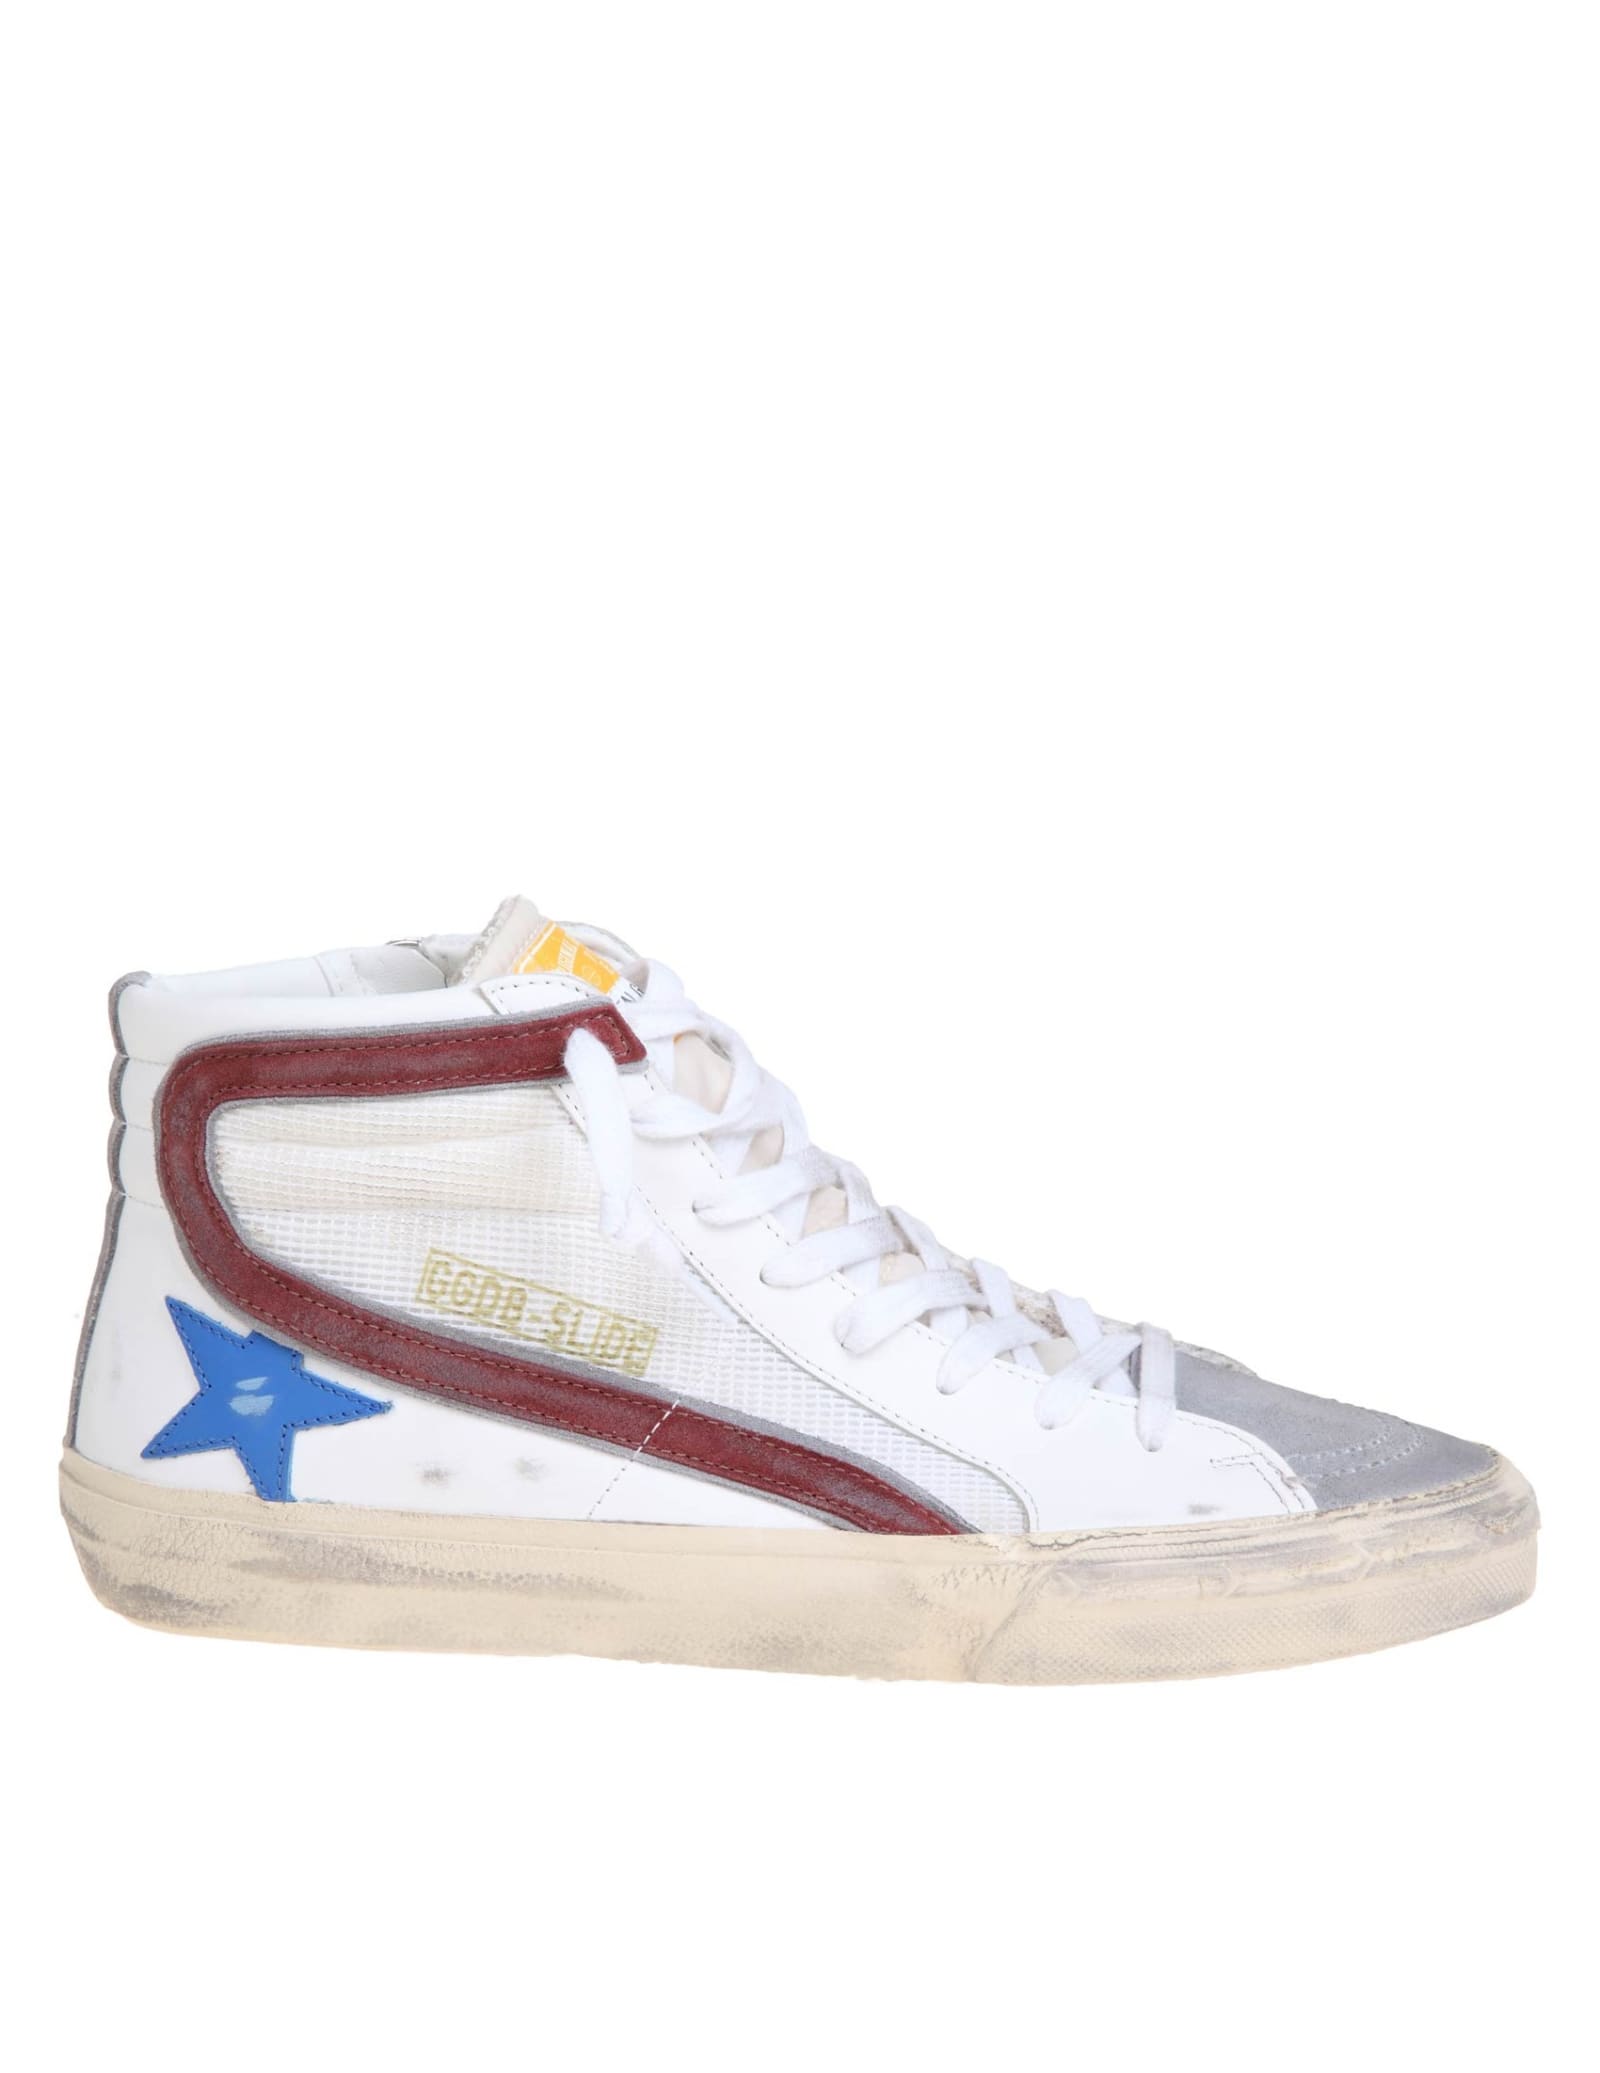 GOLDEN GOOSE GOLDEN GOOSE SLIDE SNEAKERS IN WHITE AND GRAY LEATHER